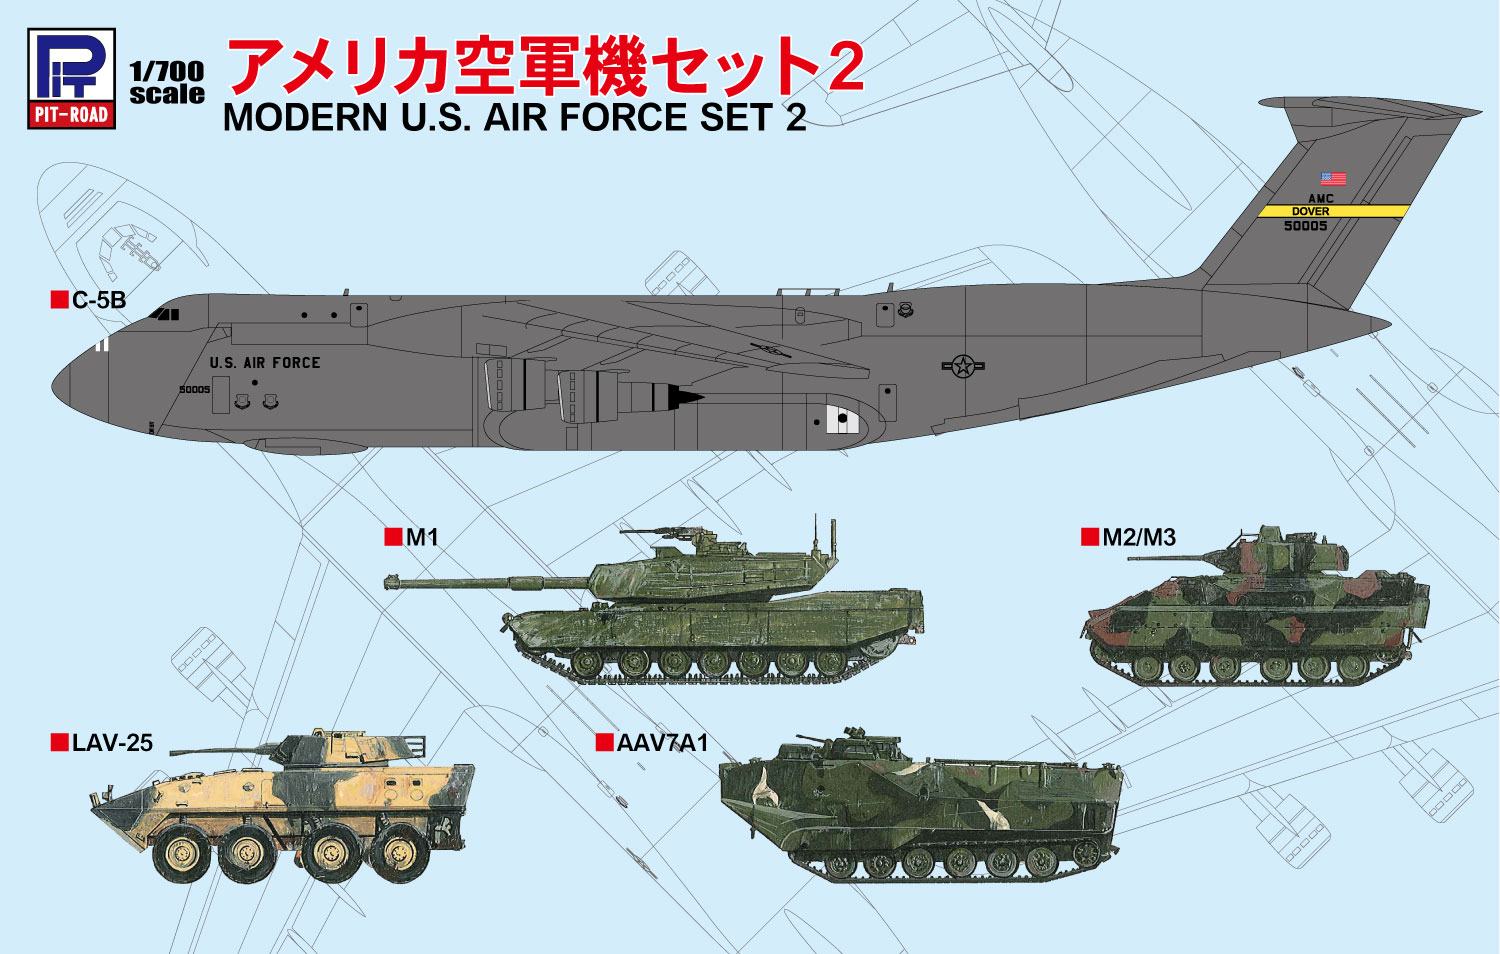 S47 1/700 アメリカ空軍機セット 2